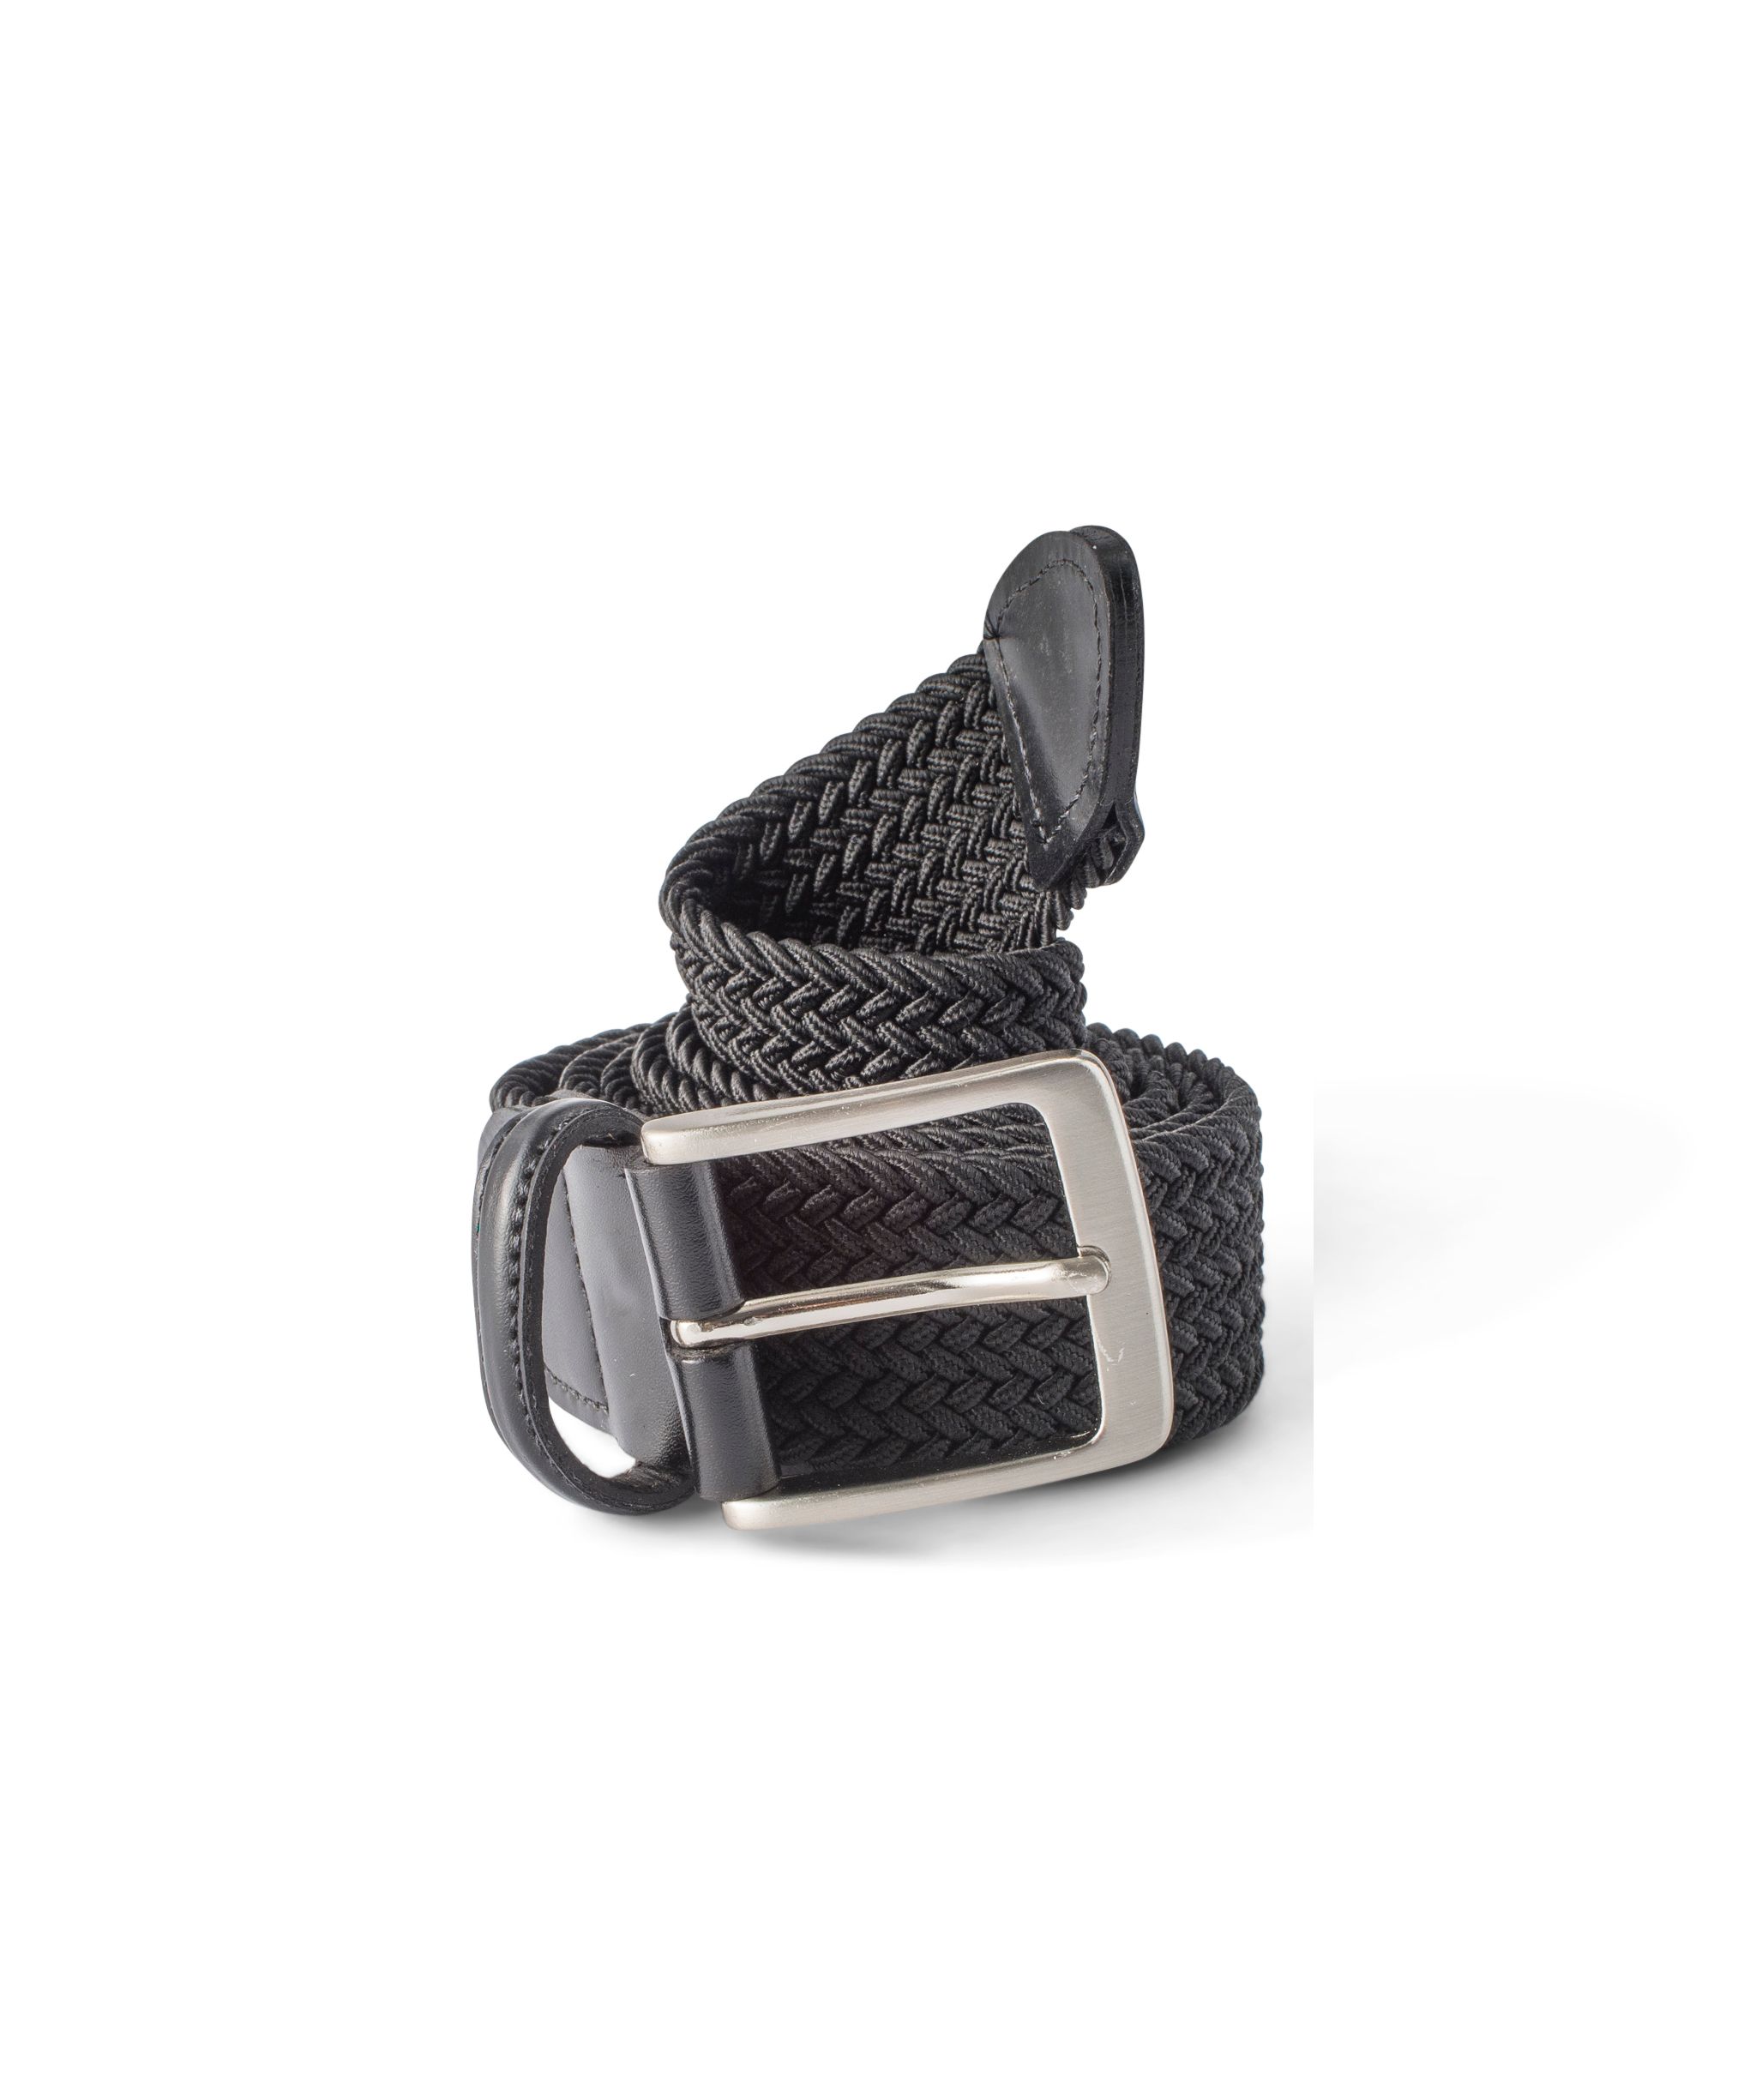 Multi Black, Grey and Silver - Woven Stretch Belt - Stolen Riches